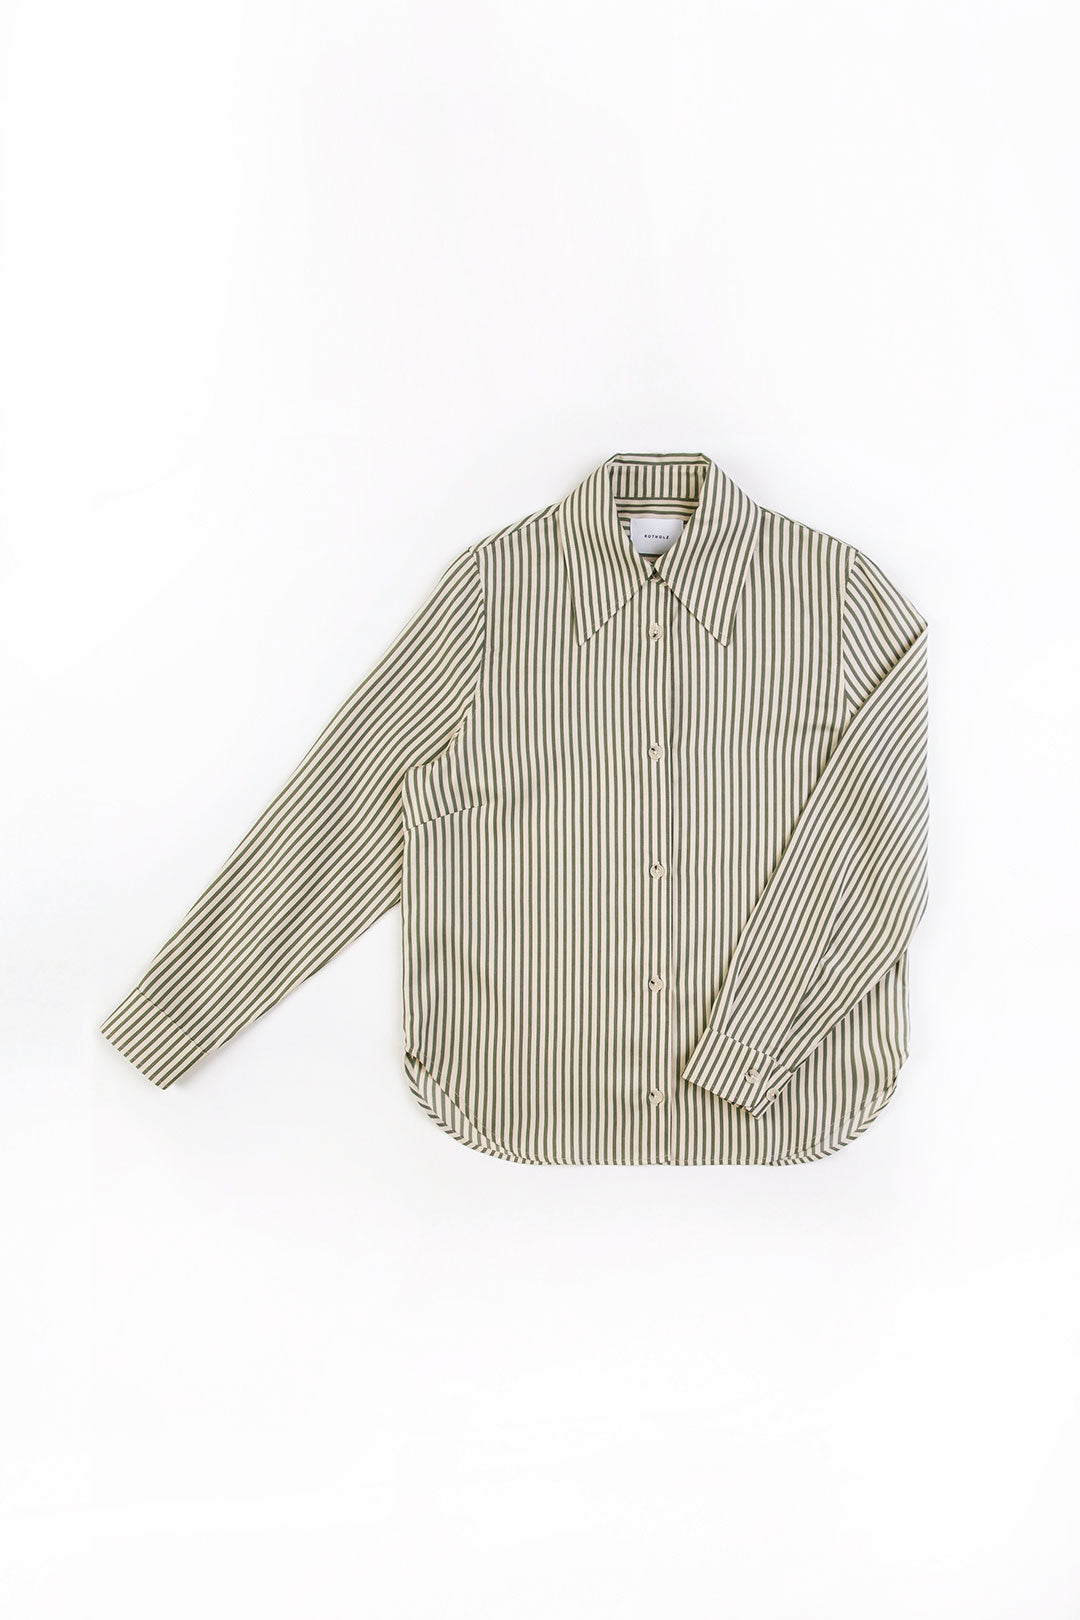 Green and white, striped shirt made from 100% Tencel Lyocell from Rotholz